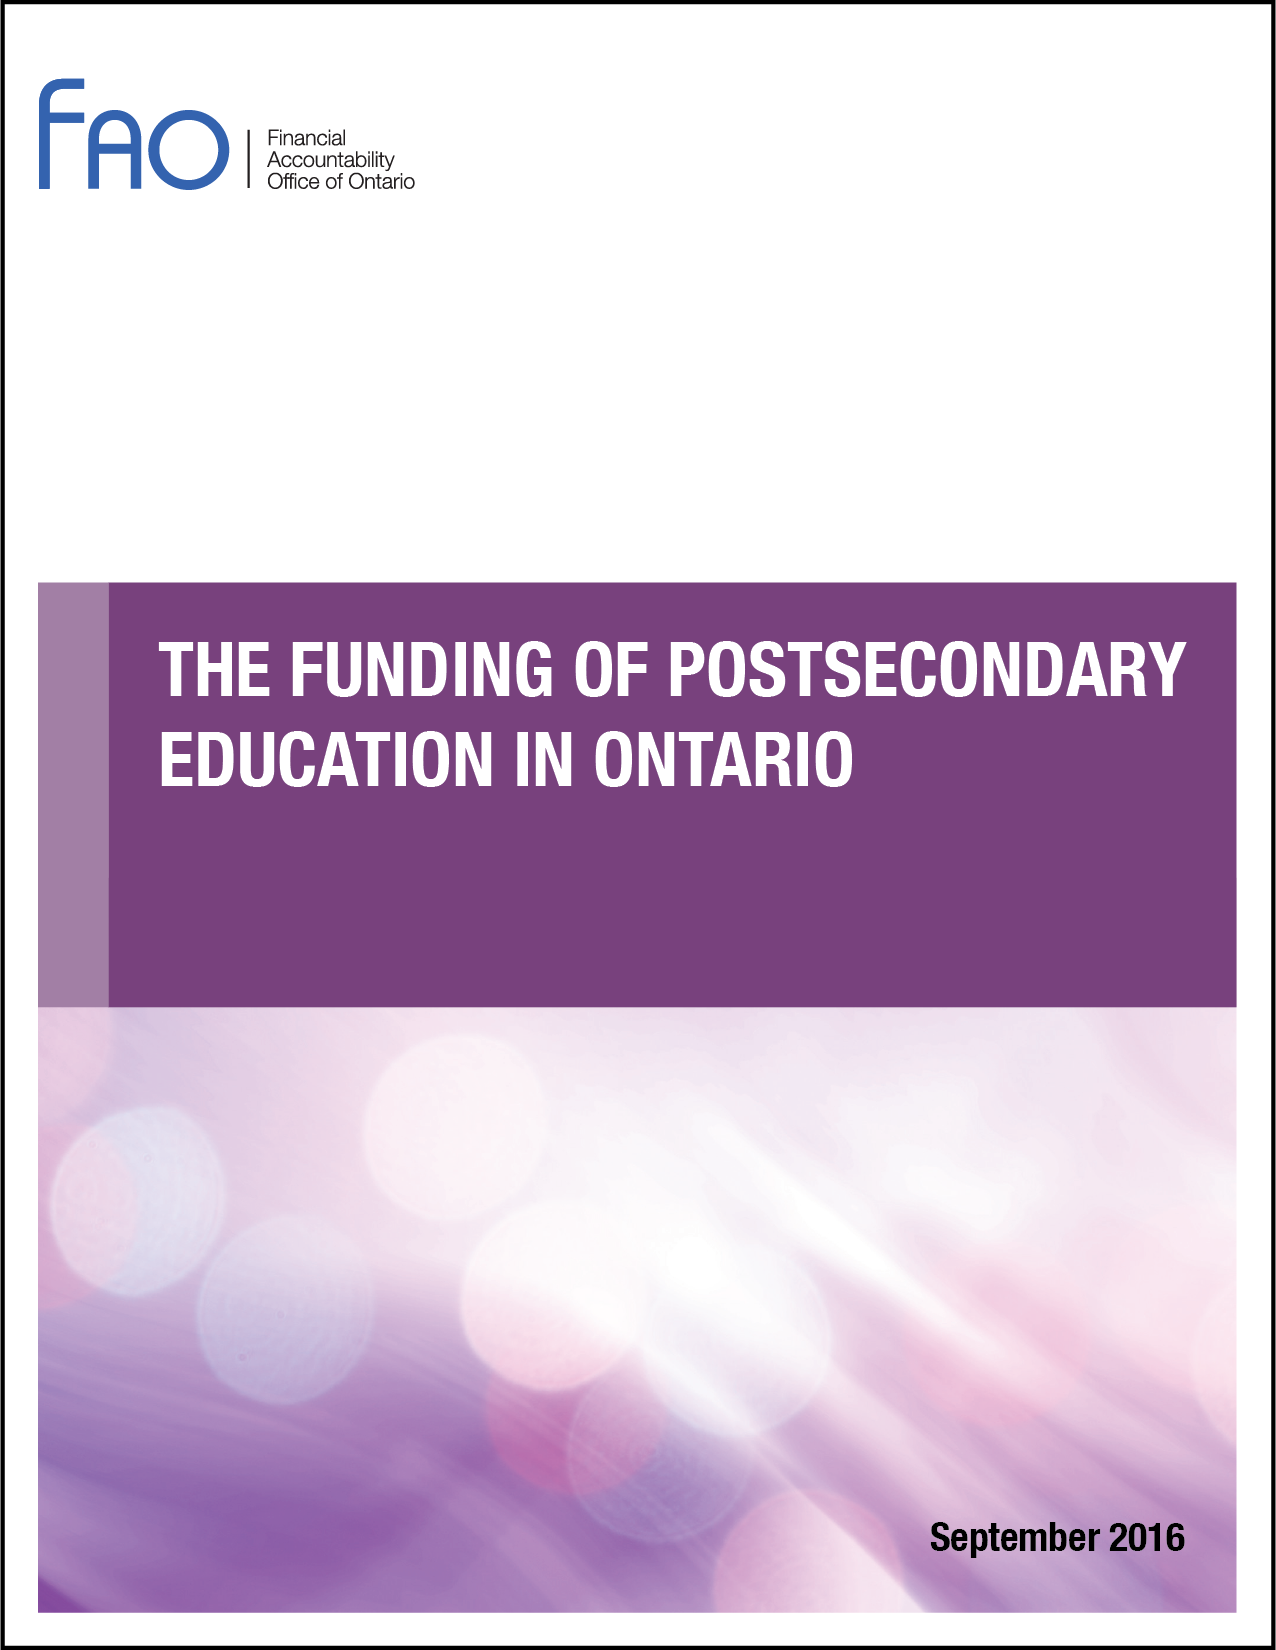 The Funding of Postsecondary Education in Ontario